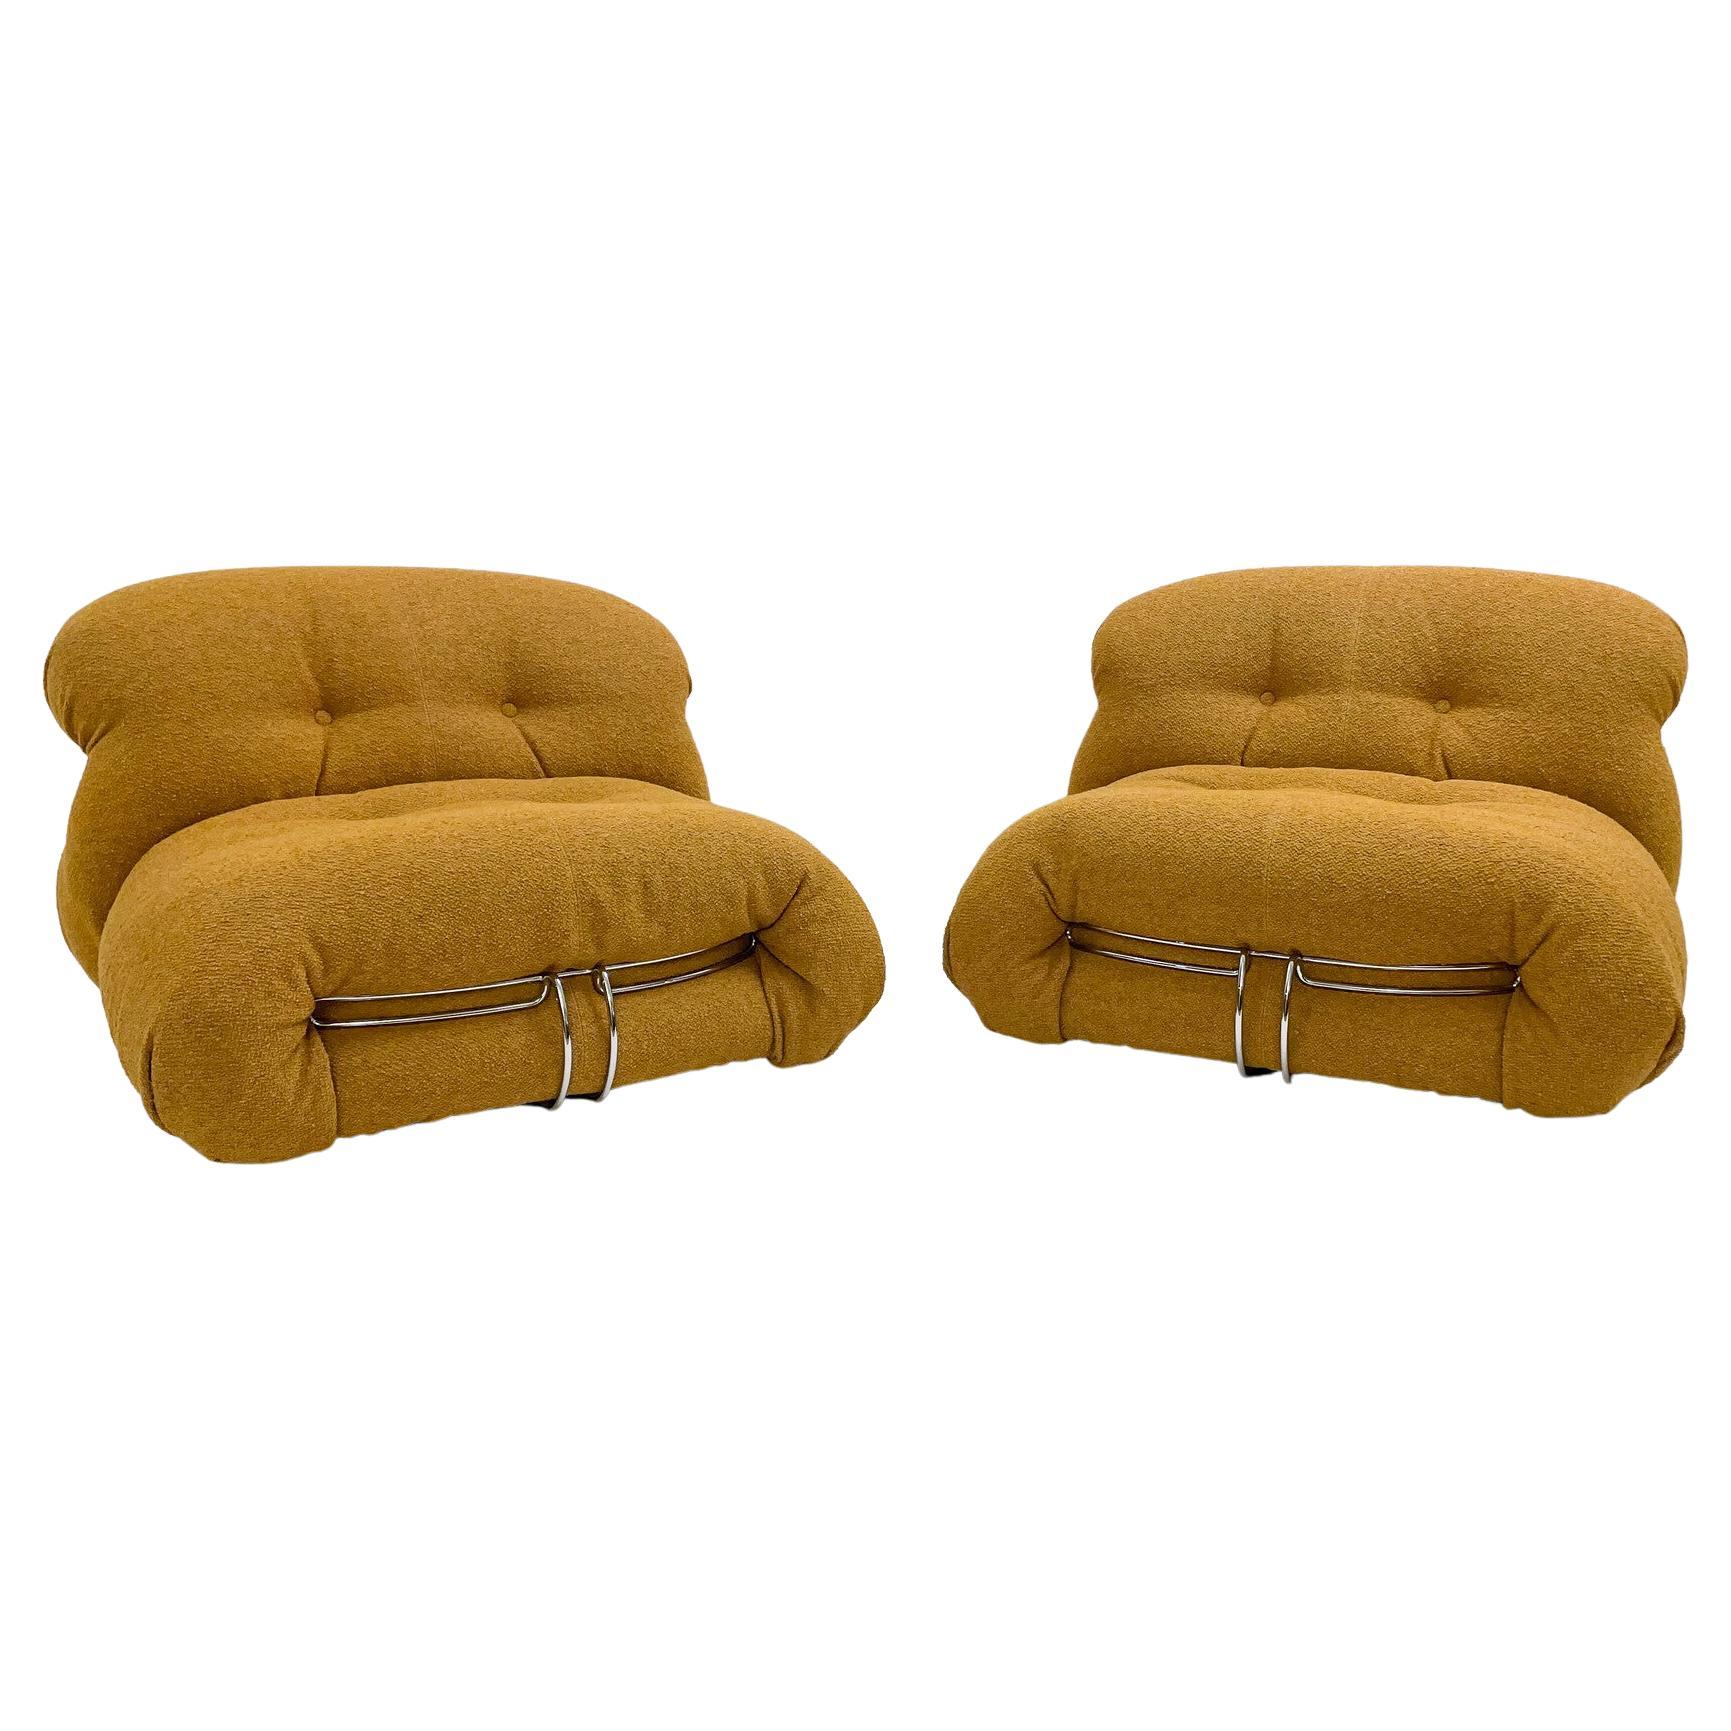 Pair of Mid-Century "Soriana" Amchairs by Afra & Tobia Scarpa for Cassina, 2022 For Sale